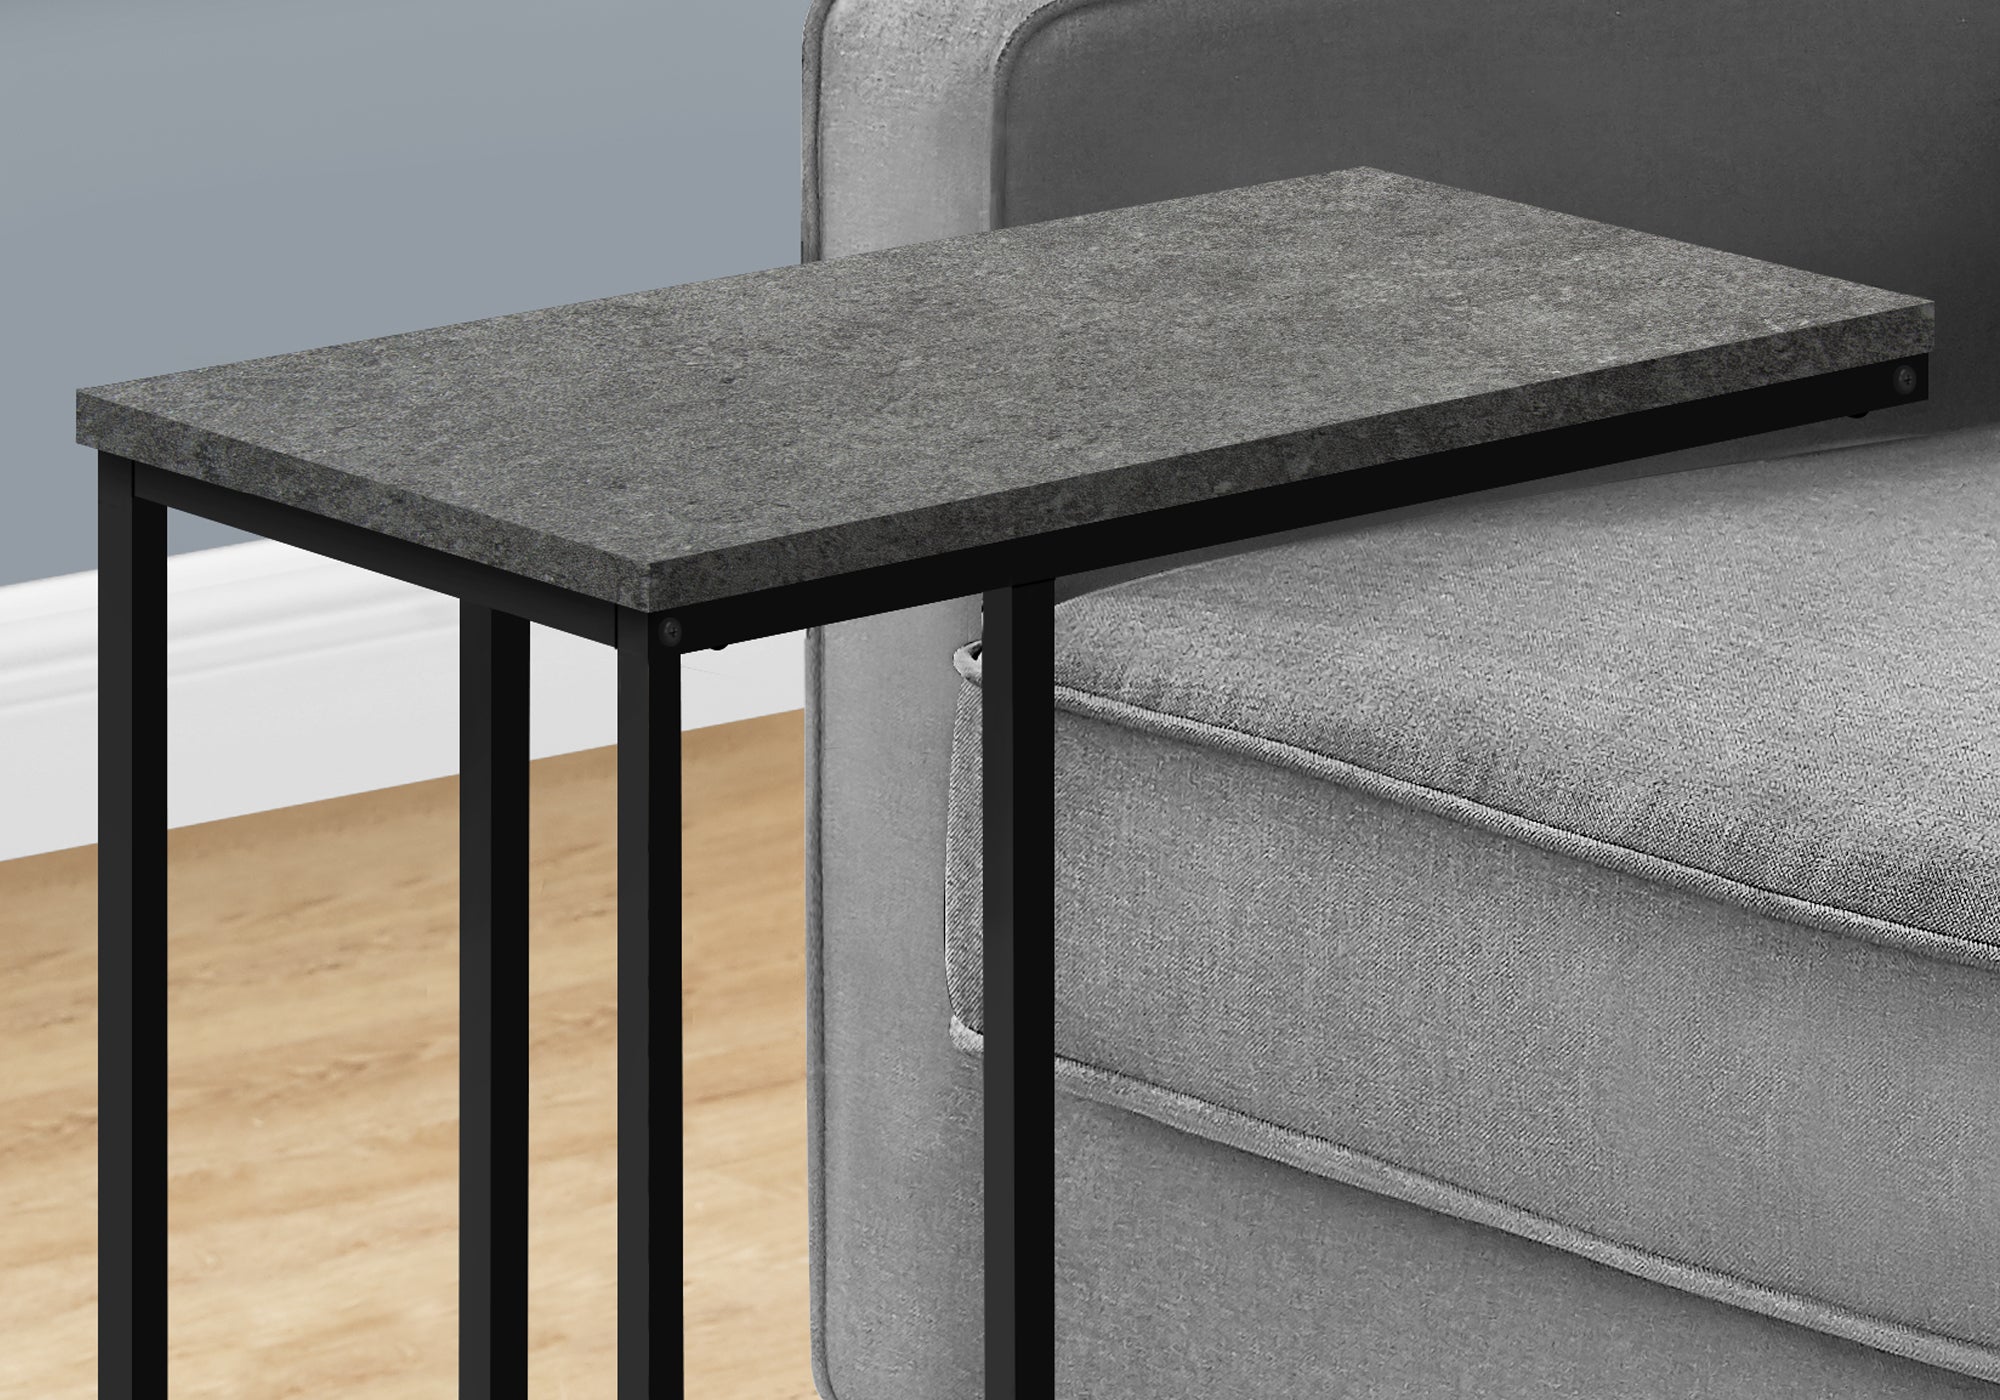 MN-453765    Side Table / C Table - Rectangular / Metal Frame - Grey Stone-Look